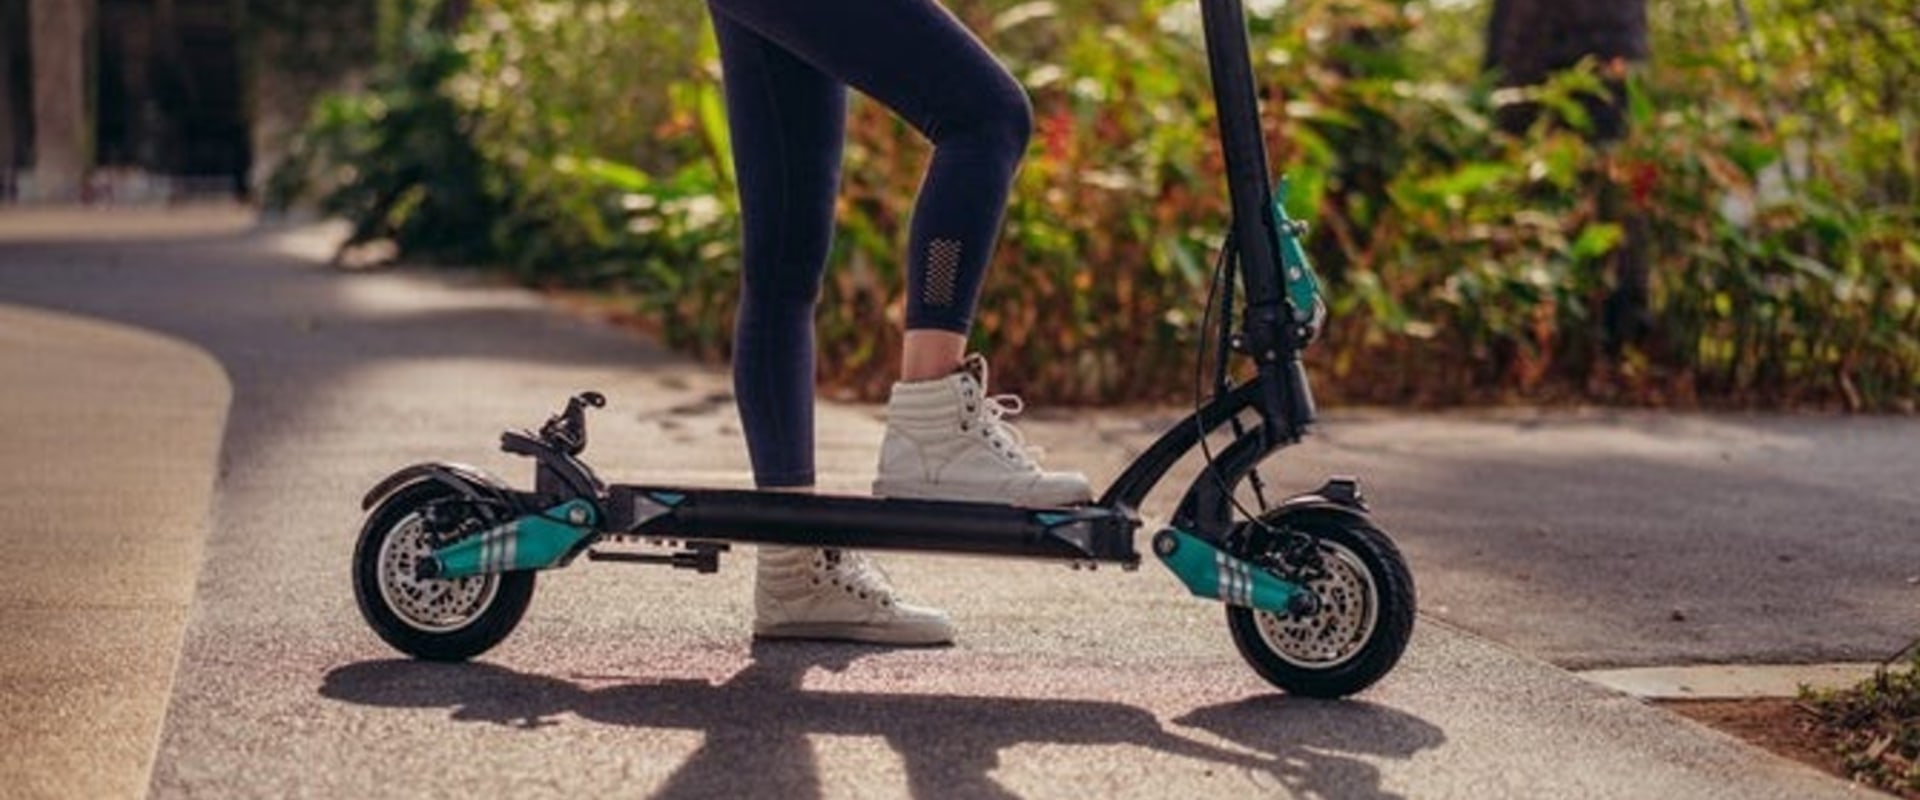 What Age Do You Have to Be to Ride an Electric Scooter in Canada?